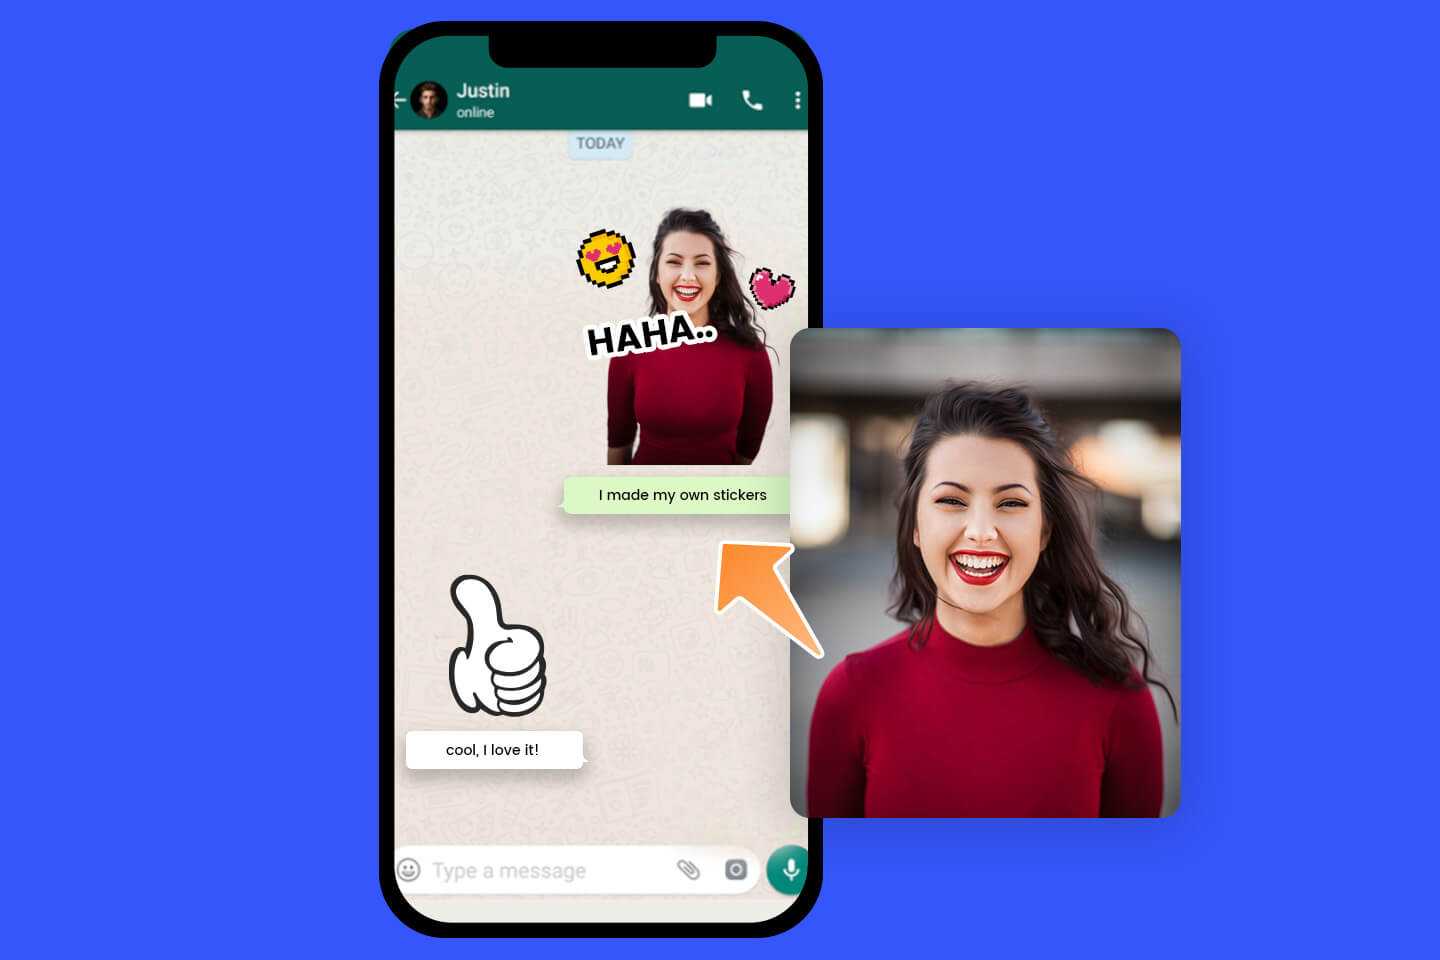 A screenshot of a WhatsApp chat with a photo of a woman smiling next to the chat, with the text "I made my own stickers" and an arrow pointing to the photo.